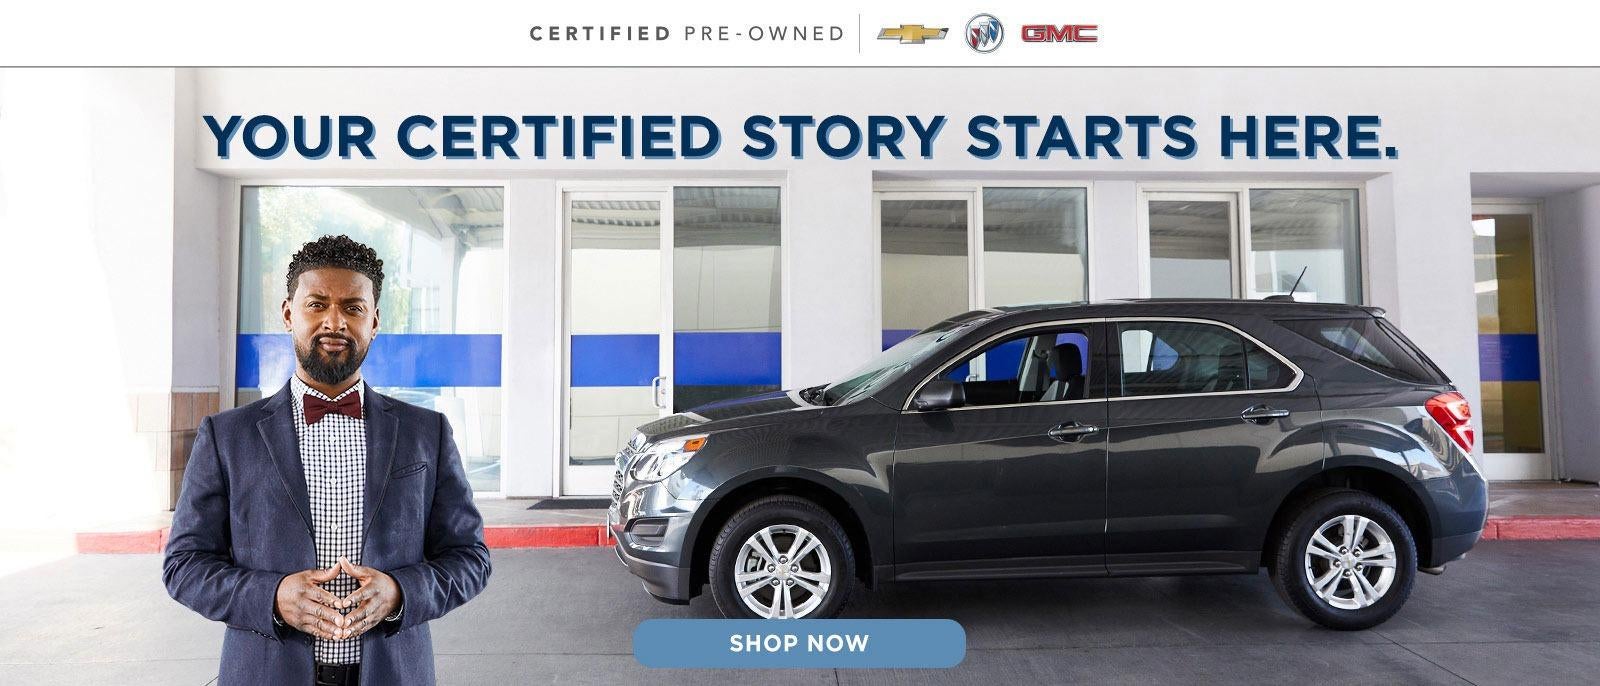 Certified Pre-Owned Vehicles at Alan Webb Chevrolet Vancouver WA